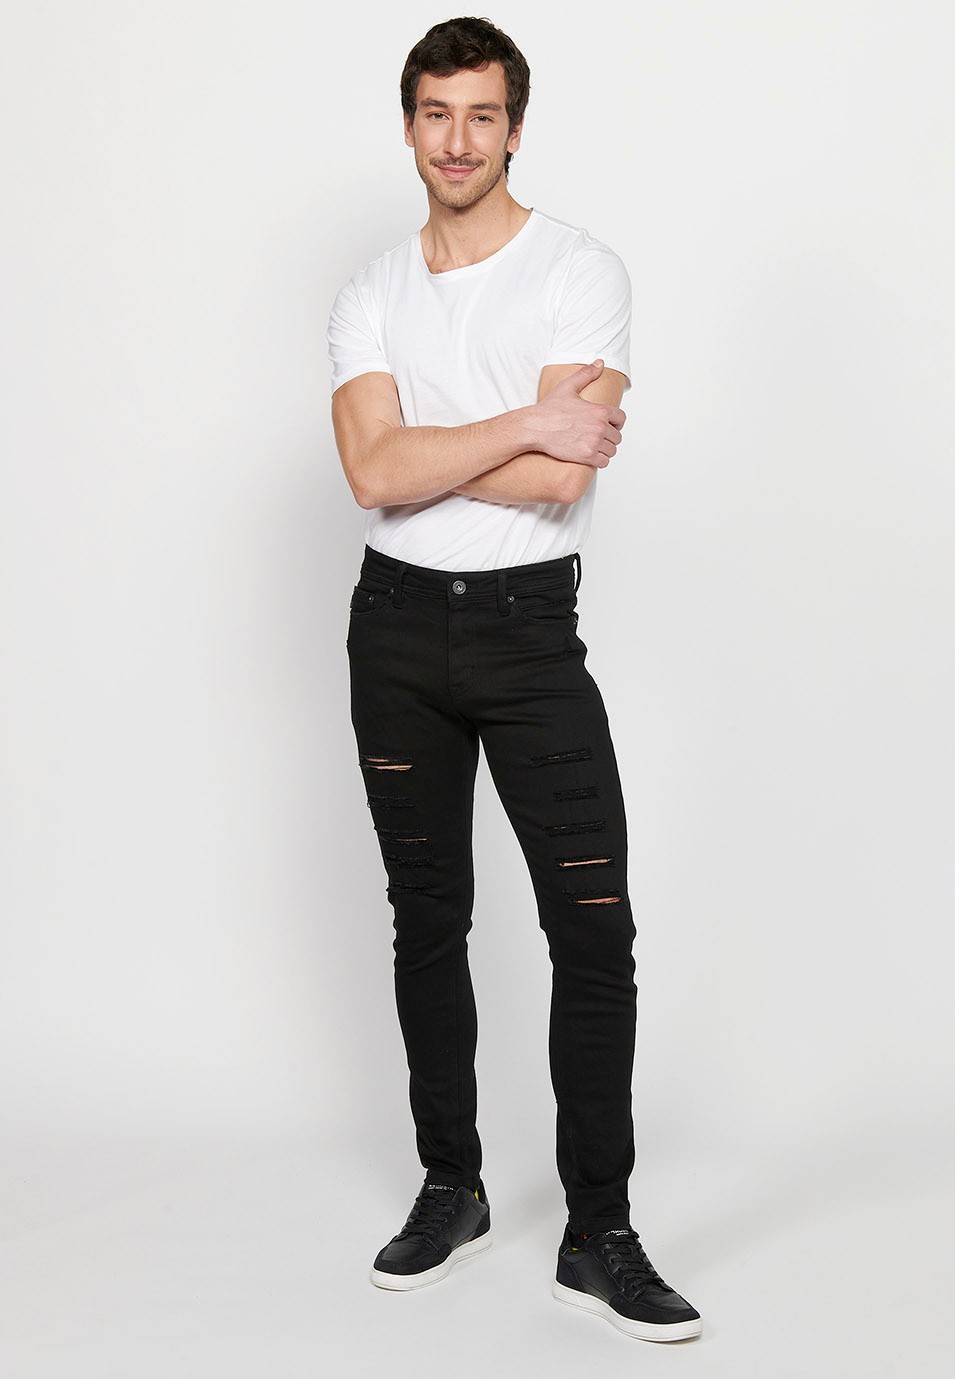 Long slim super skinny jeans with front closure with zipper and button in Black Denim Color for Men